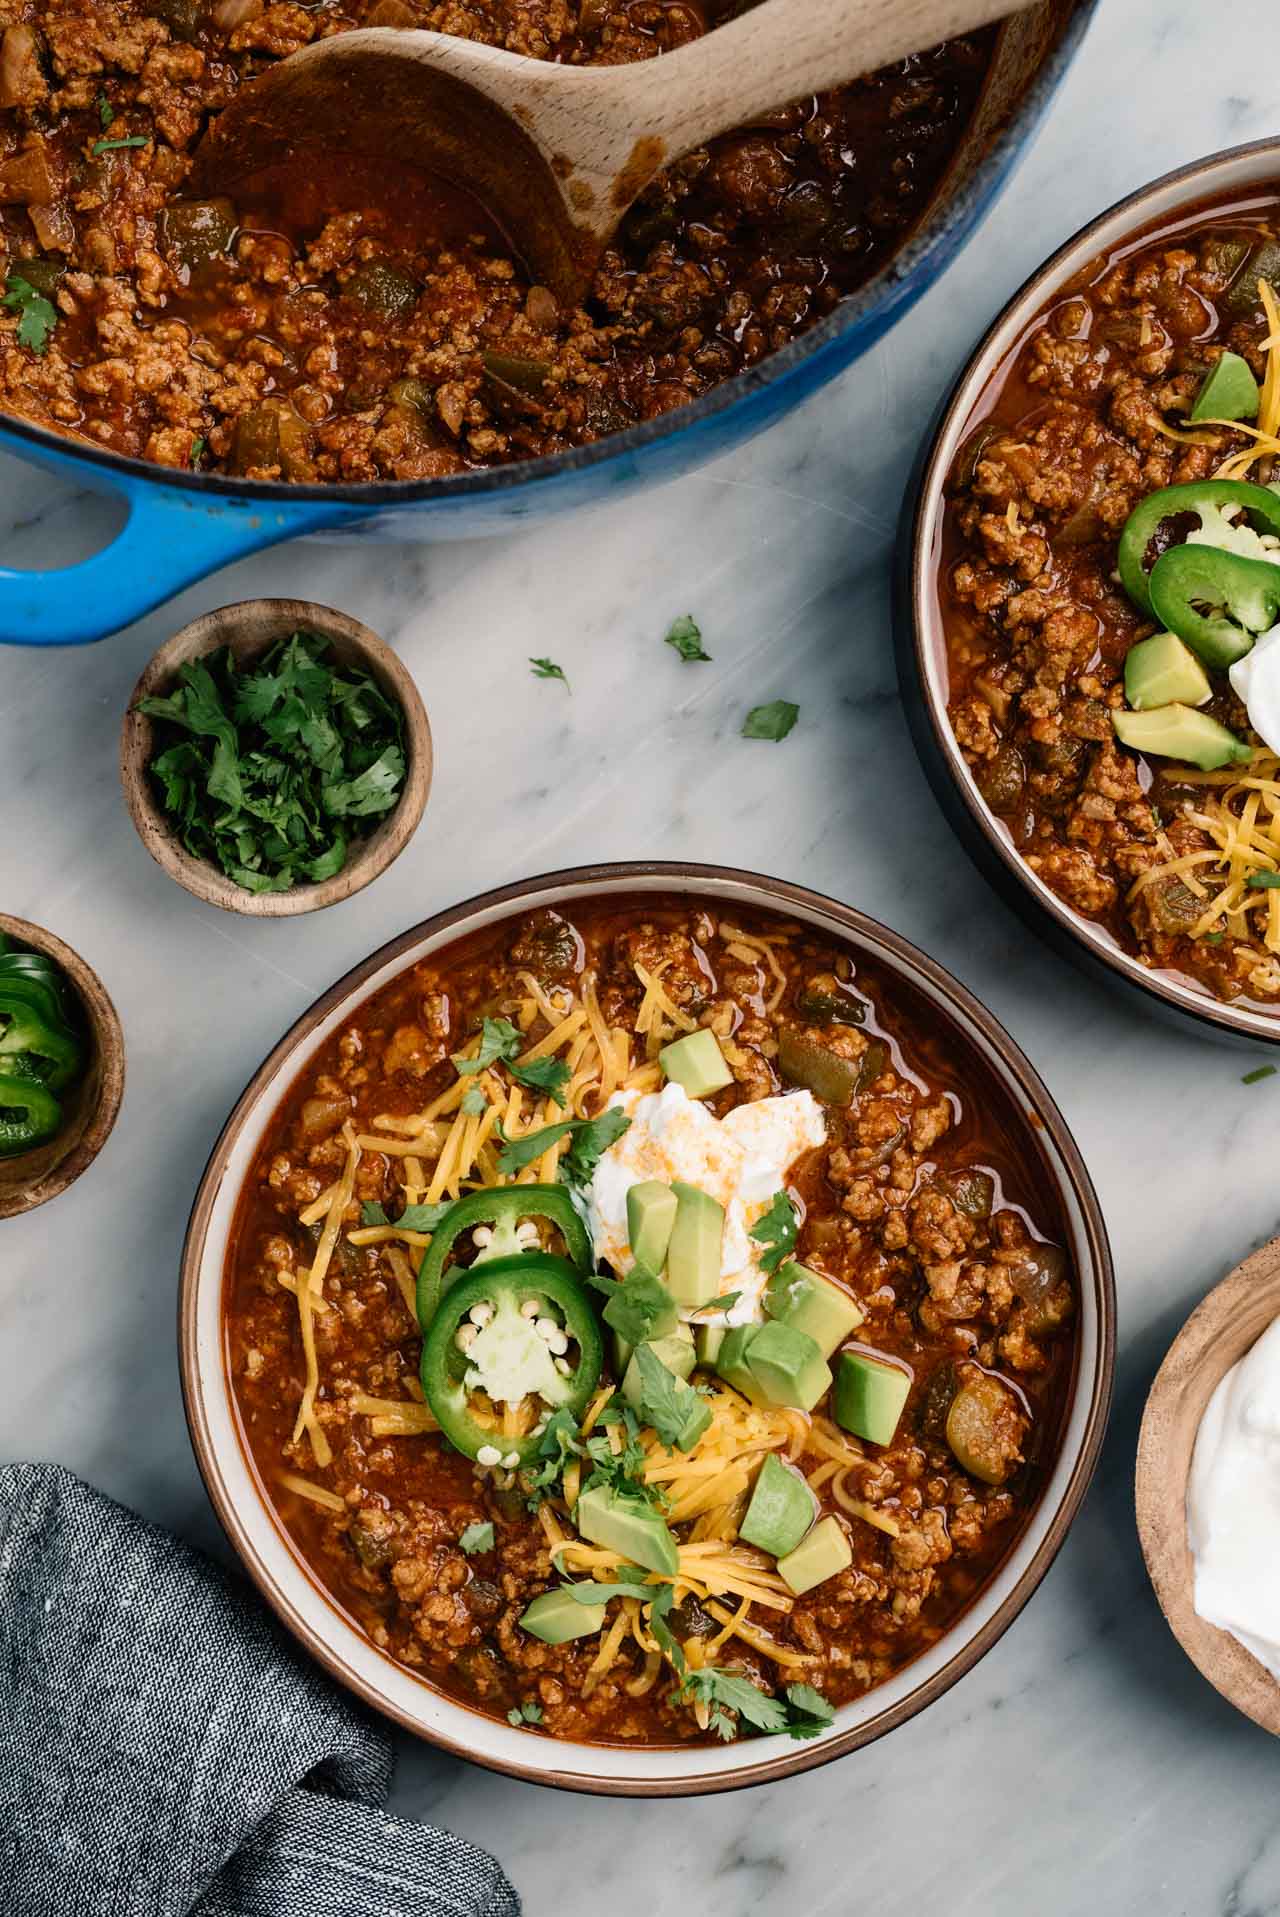 An award-winning beef chili recipe that’s the best! You’ve found it!